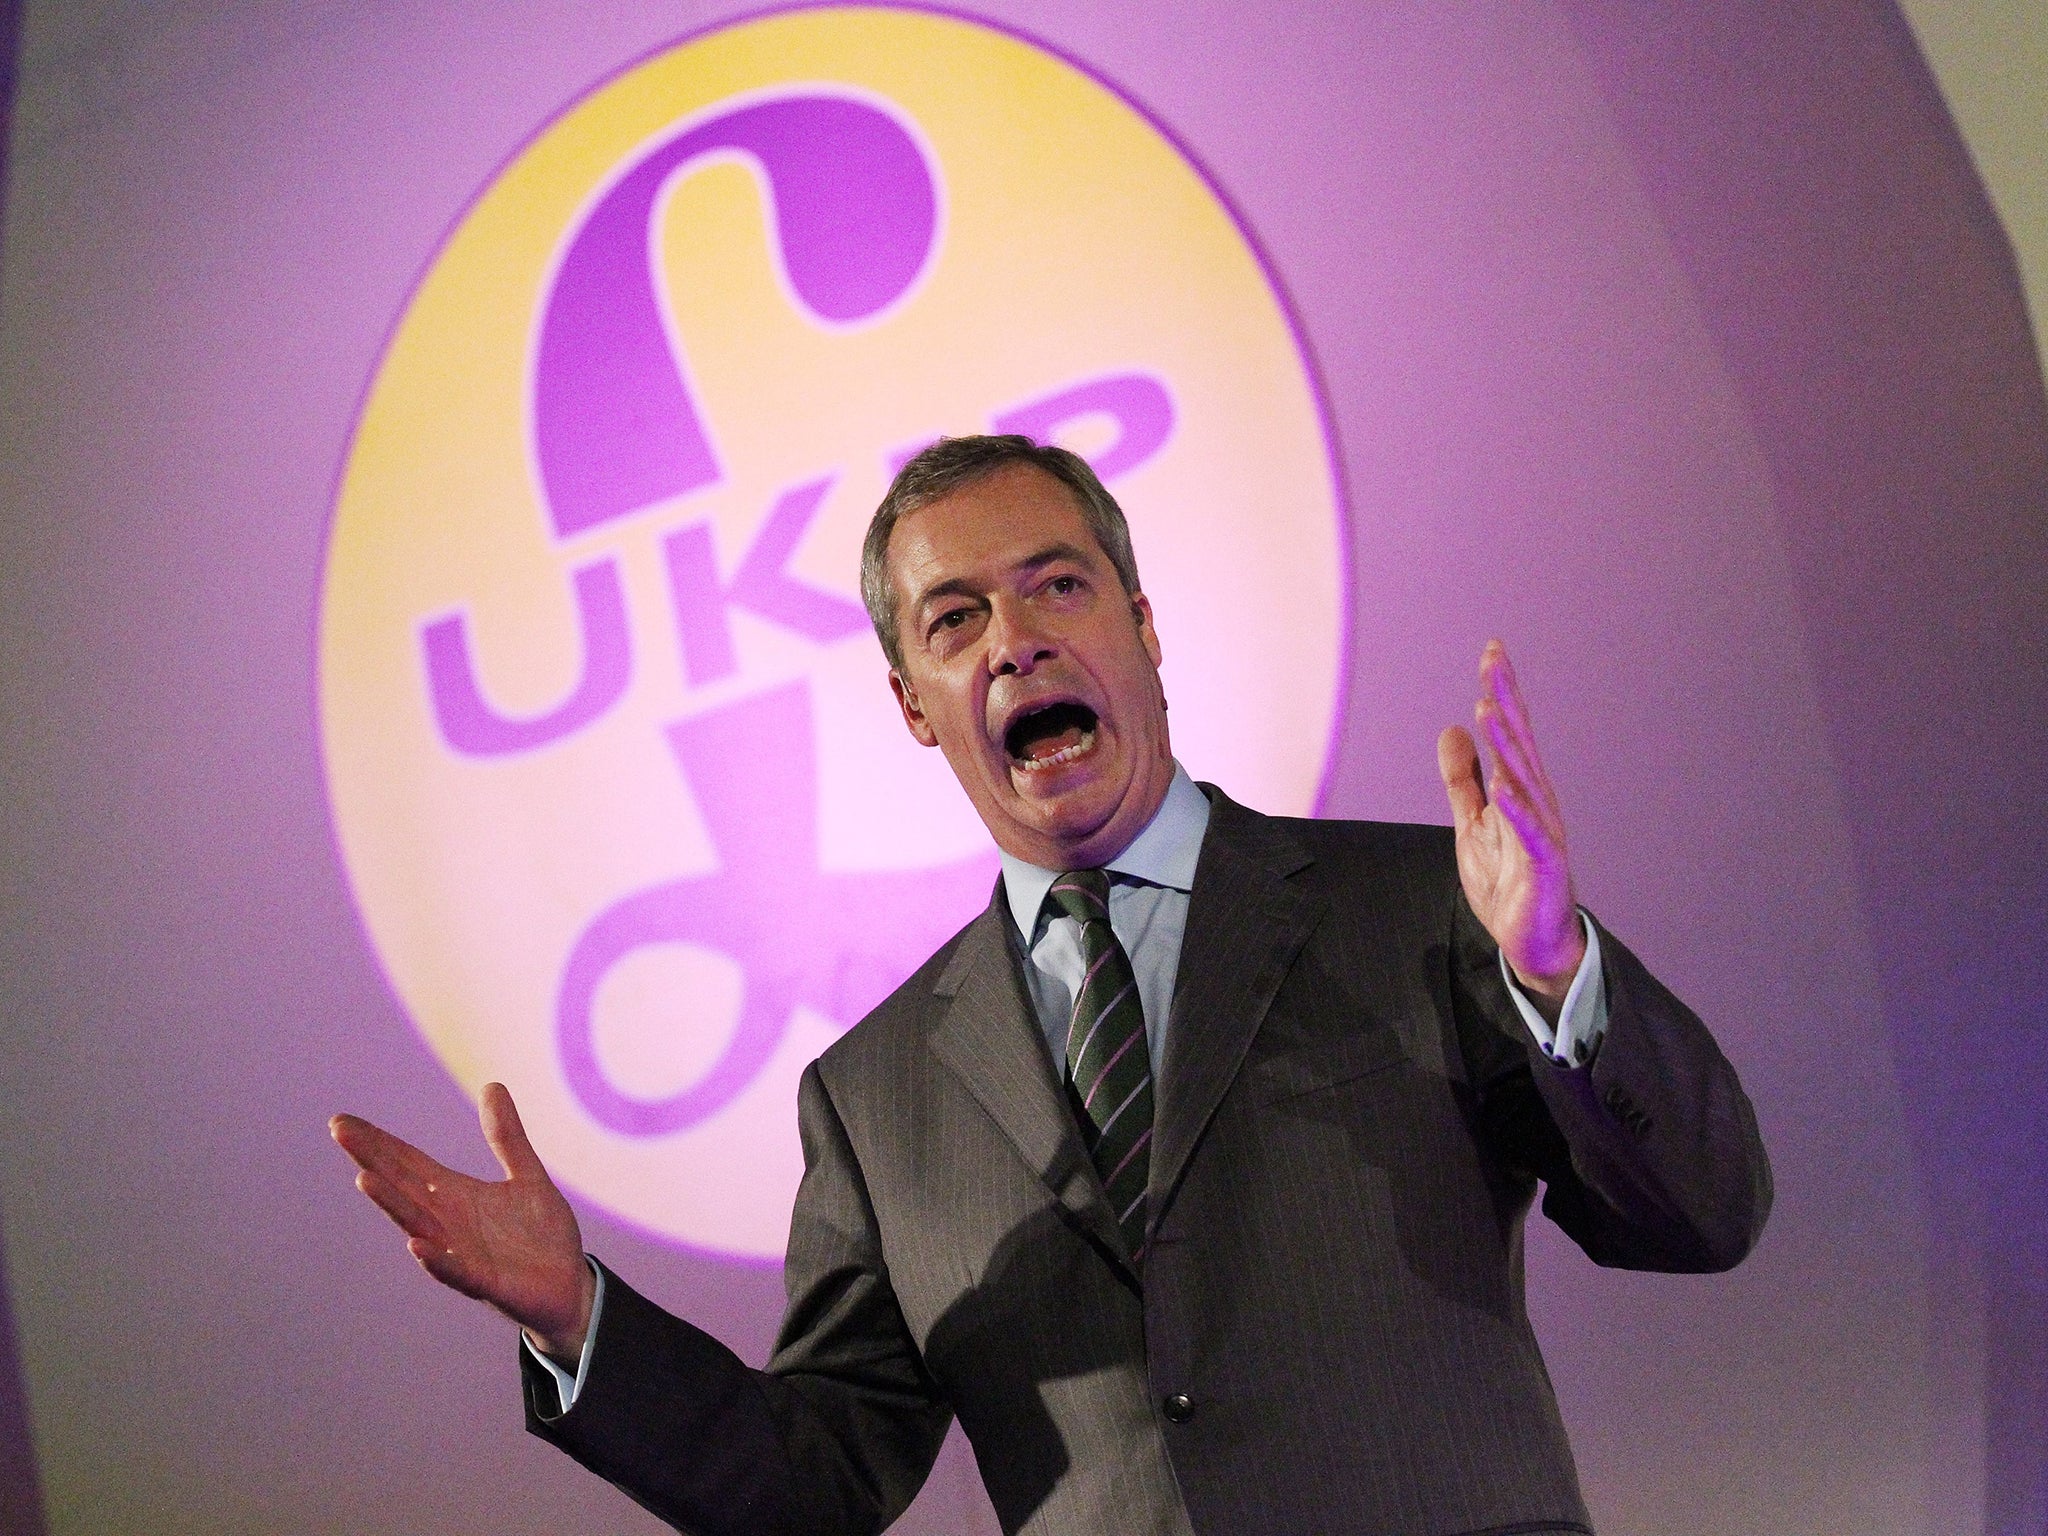 Ukip leader Nigel Farage delivering his speech at Doncaster yesterday in which only one sentence was about the EU